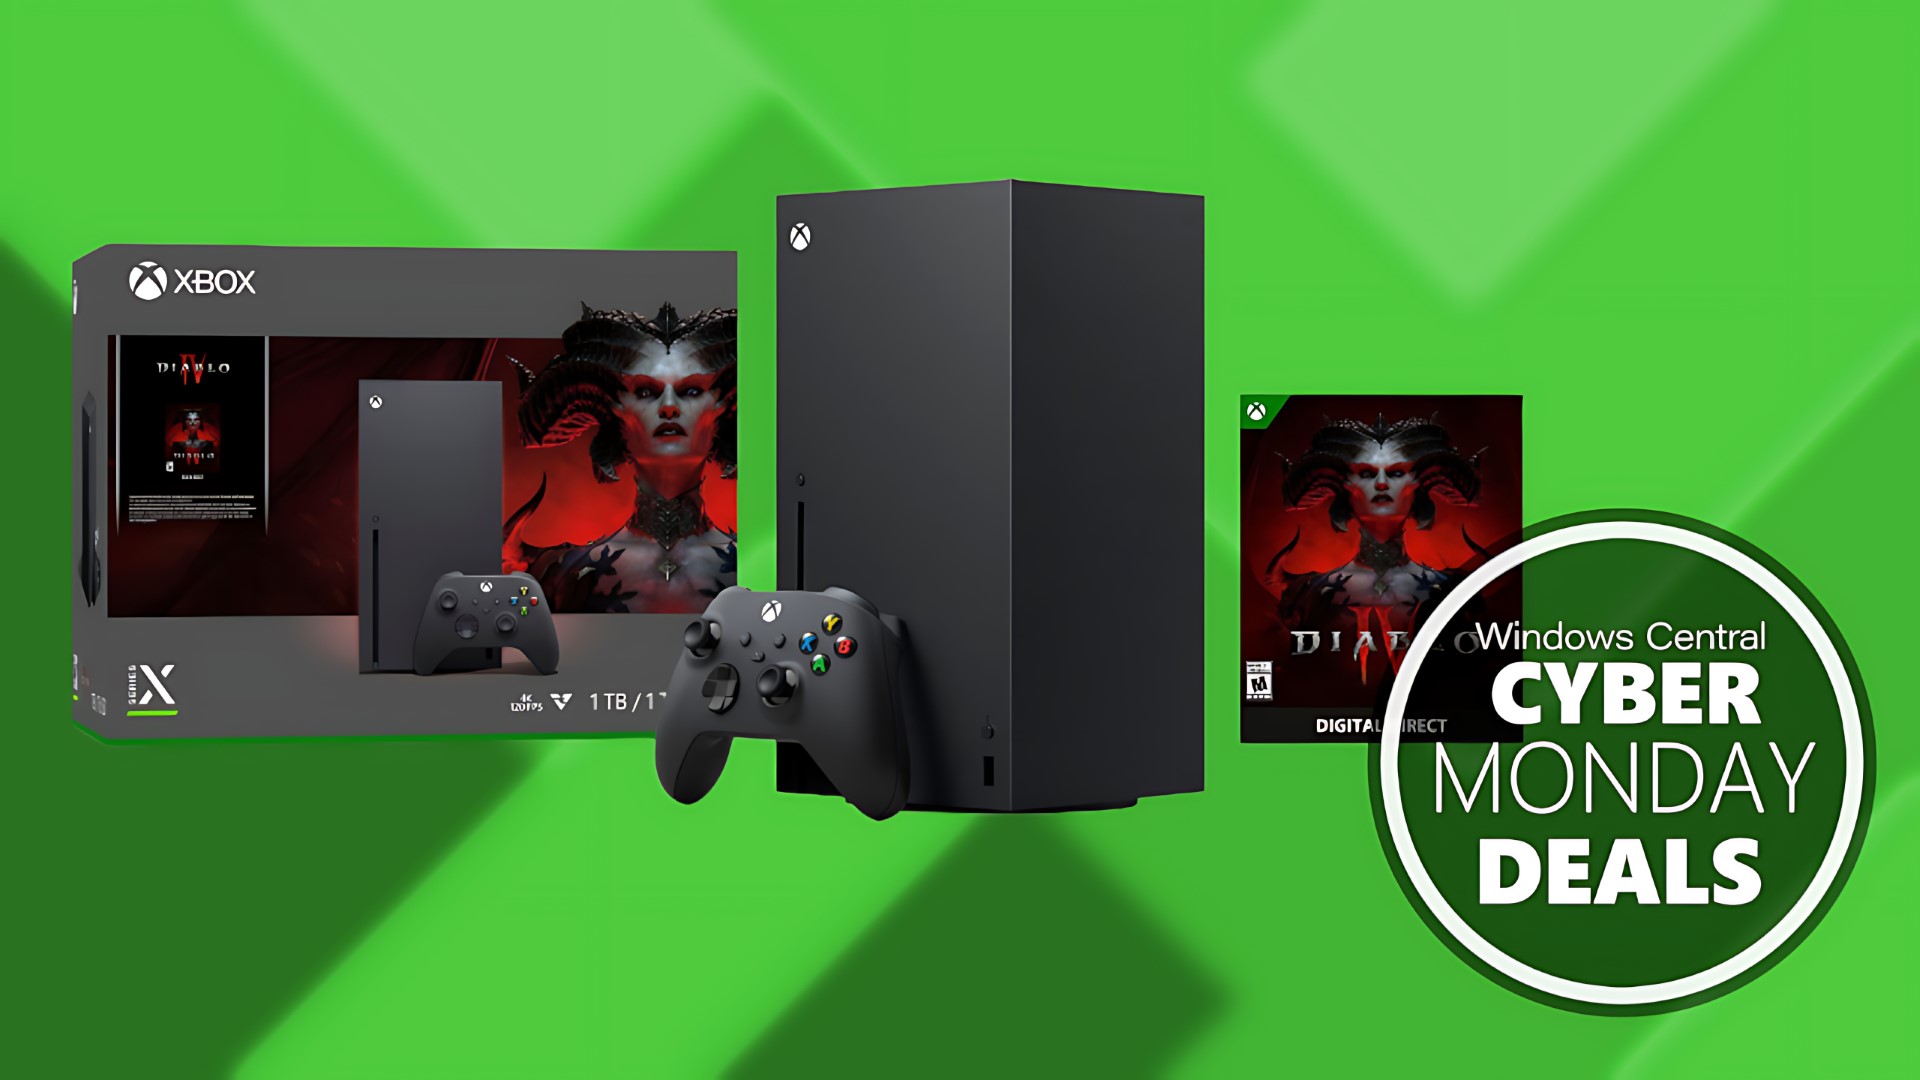 Xbox Series X gets major price cut and free Diablo 4 download